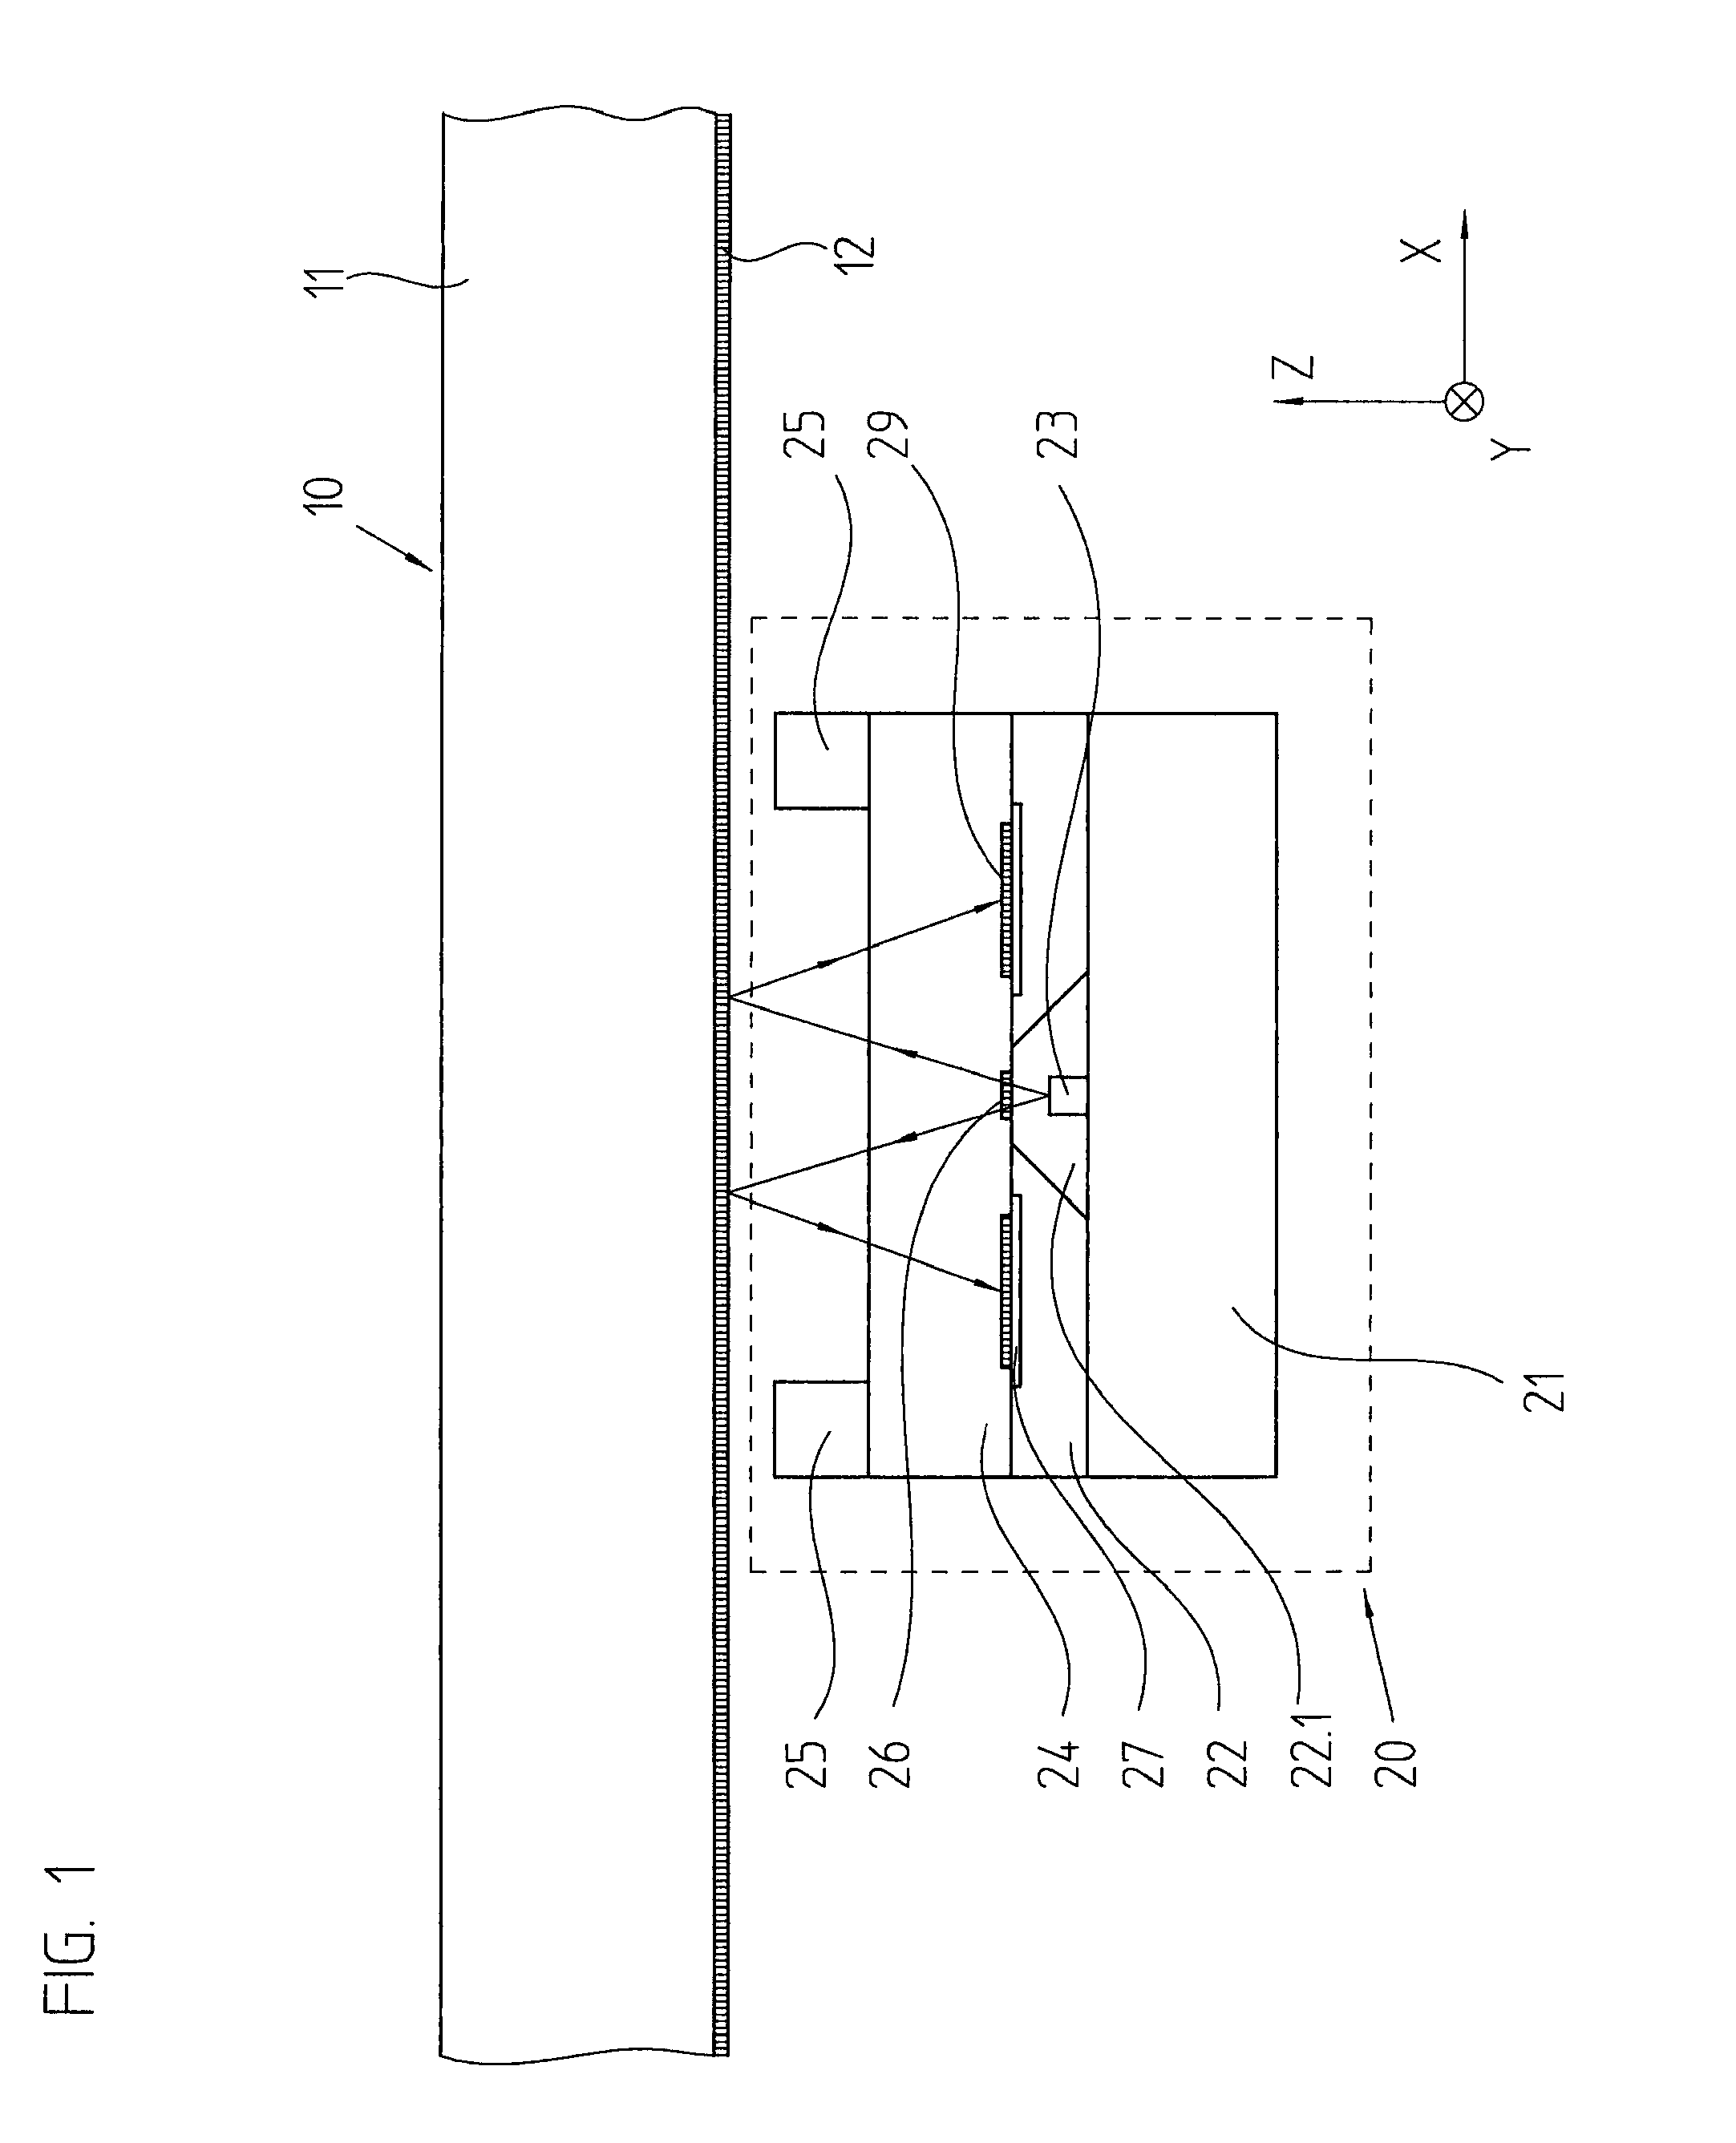 Optical position-measuring device